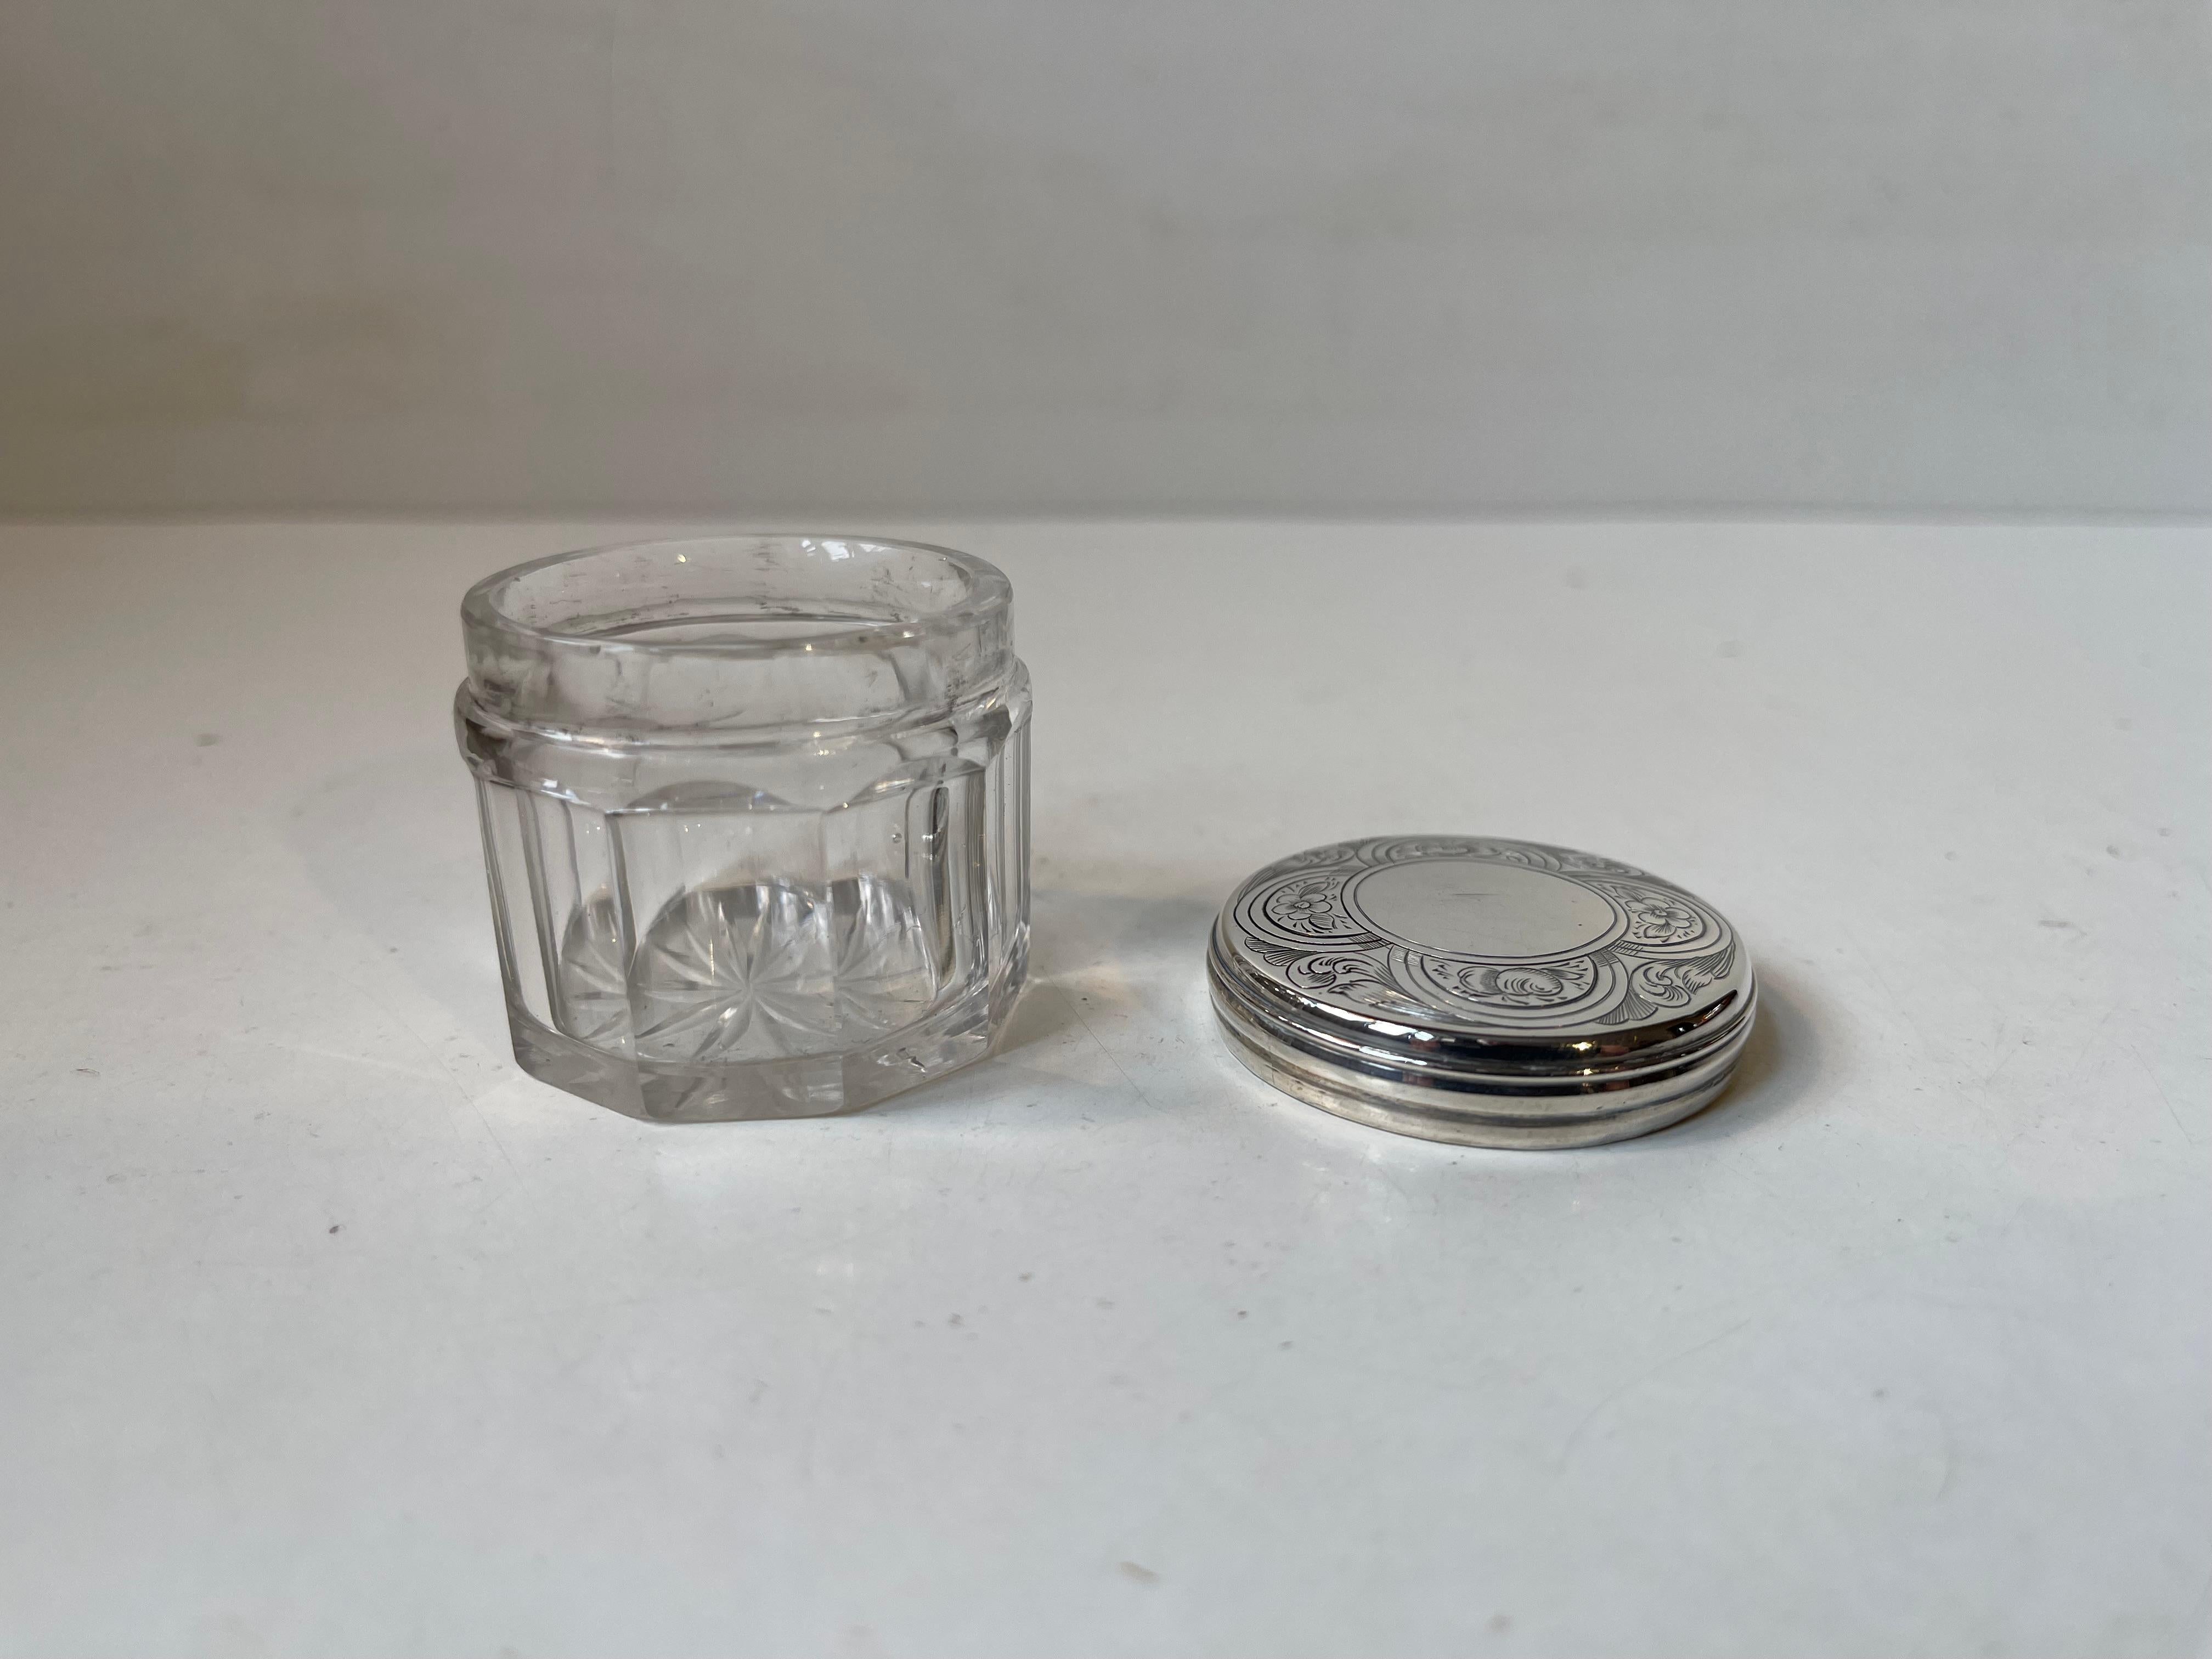 Early Victorian Antique Silver & Crystal Vanity Jar from Thomas Wallis, London 19th century For Sale